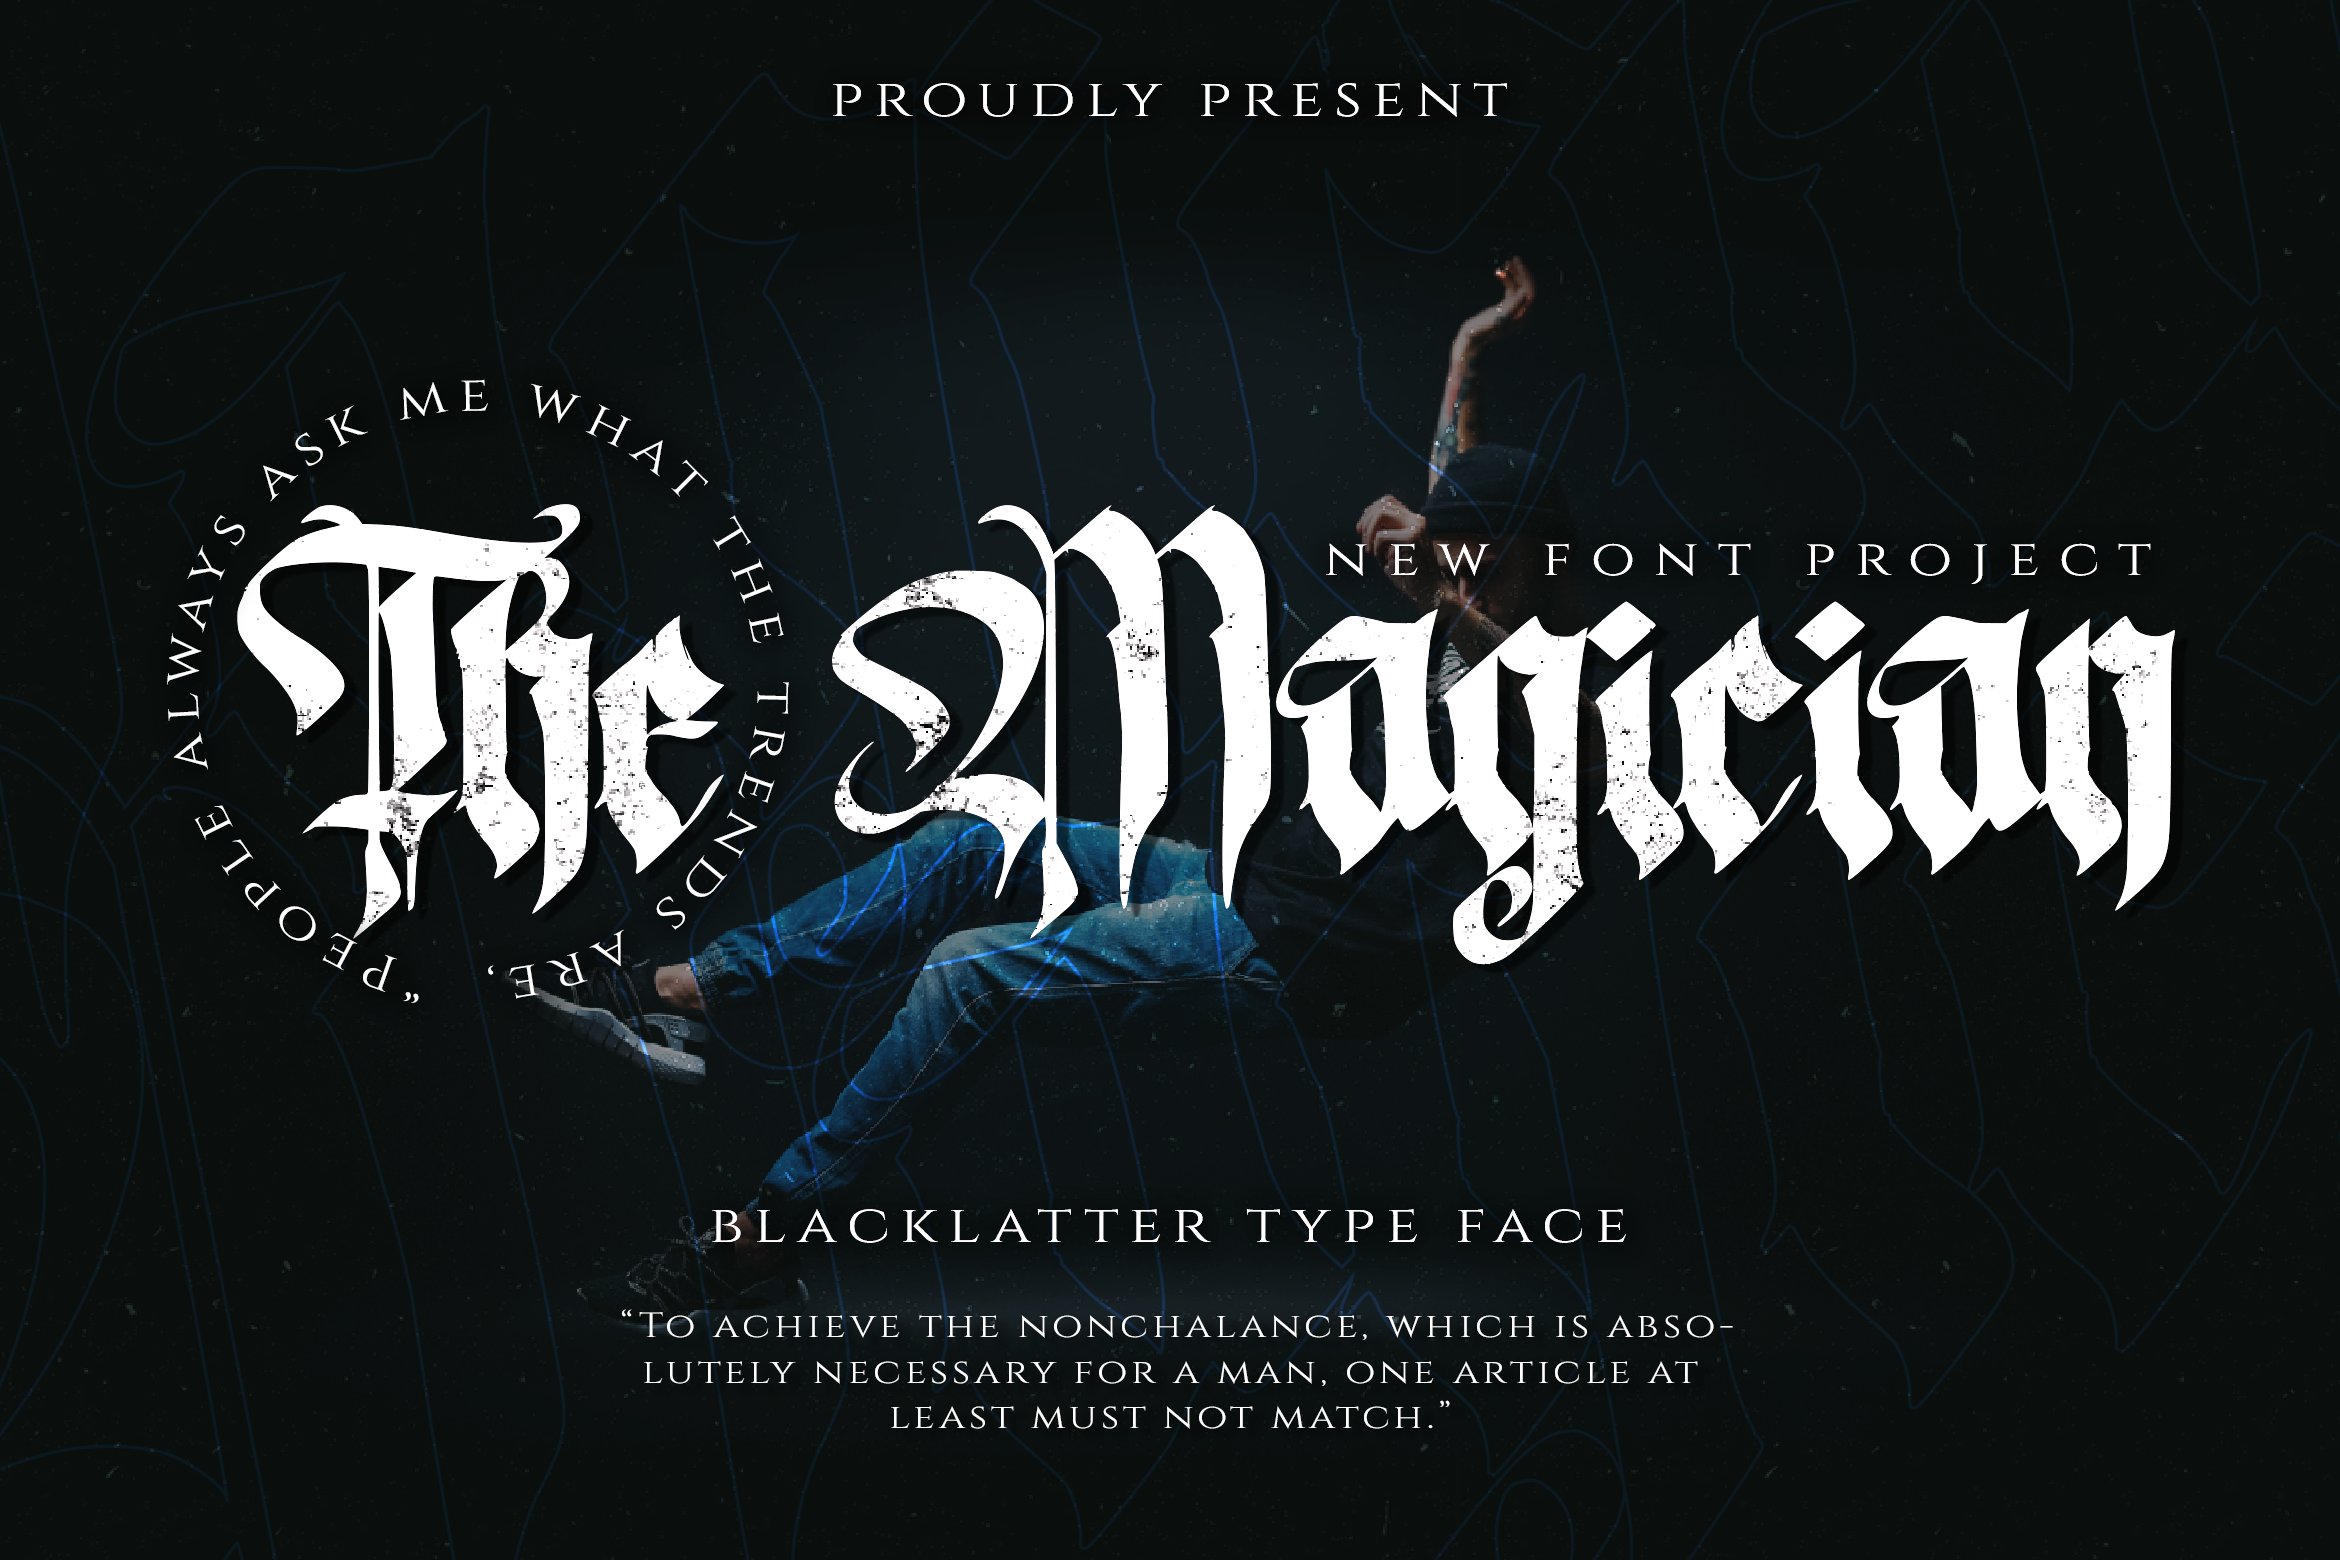 The Magician - Blackletter Typeface cover image.